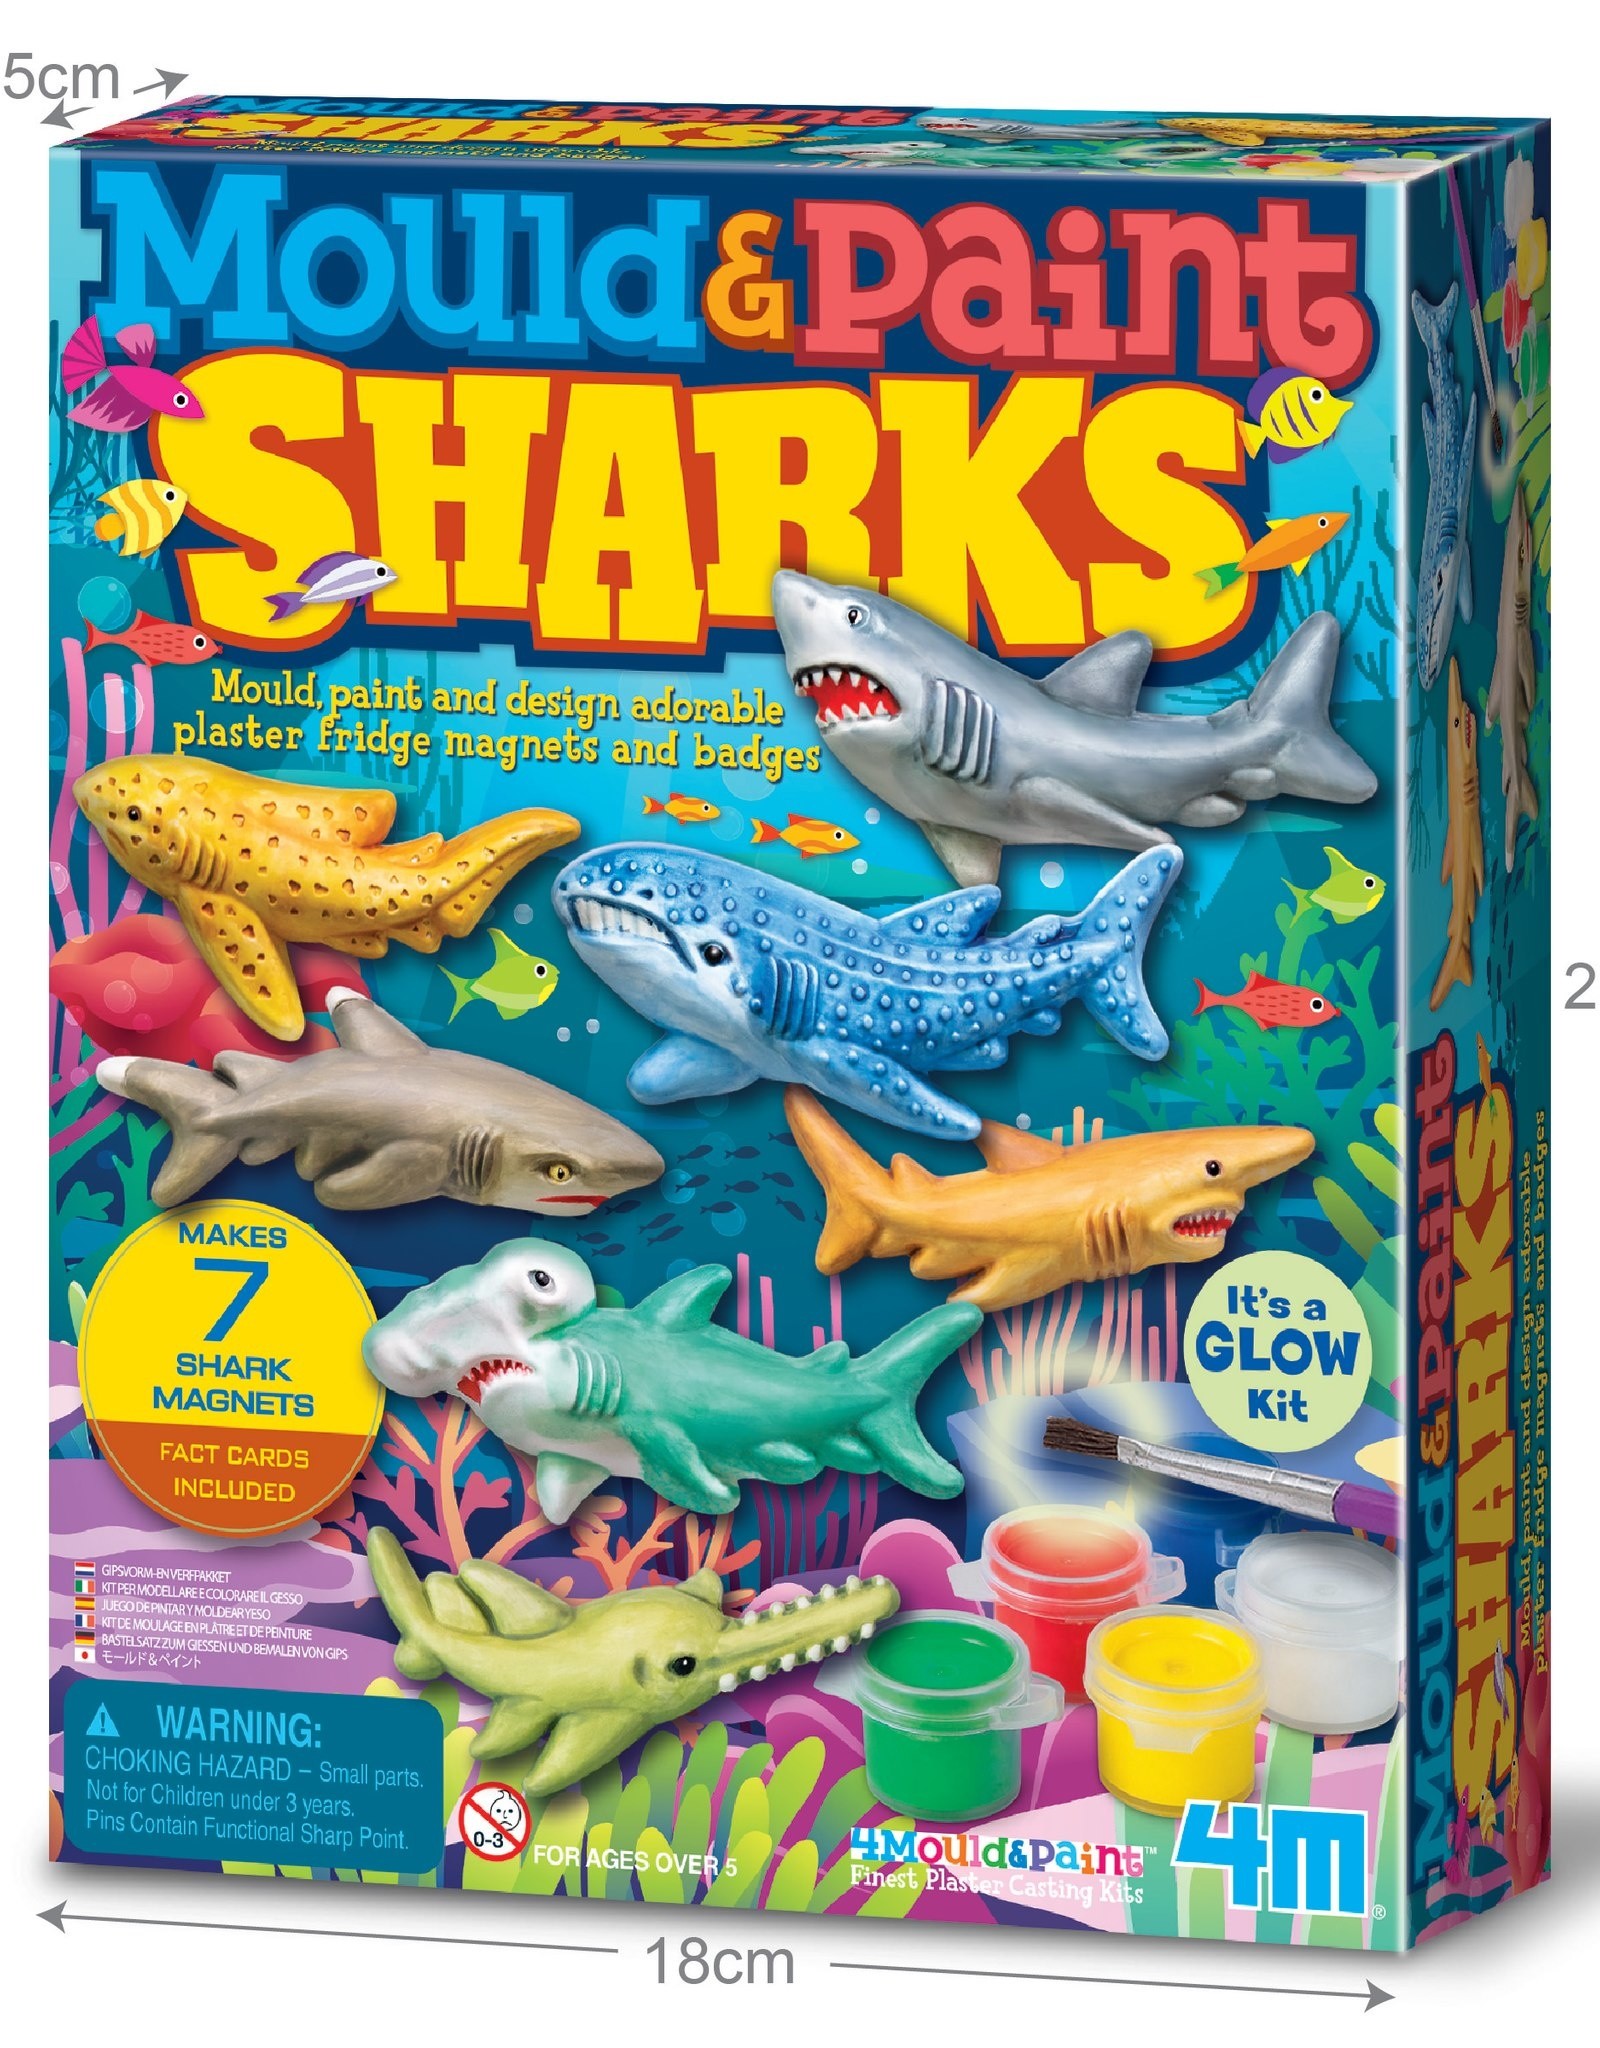 Playwell Mould & Paint Sharks